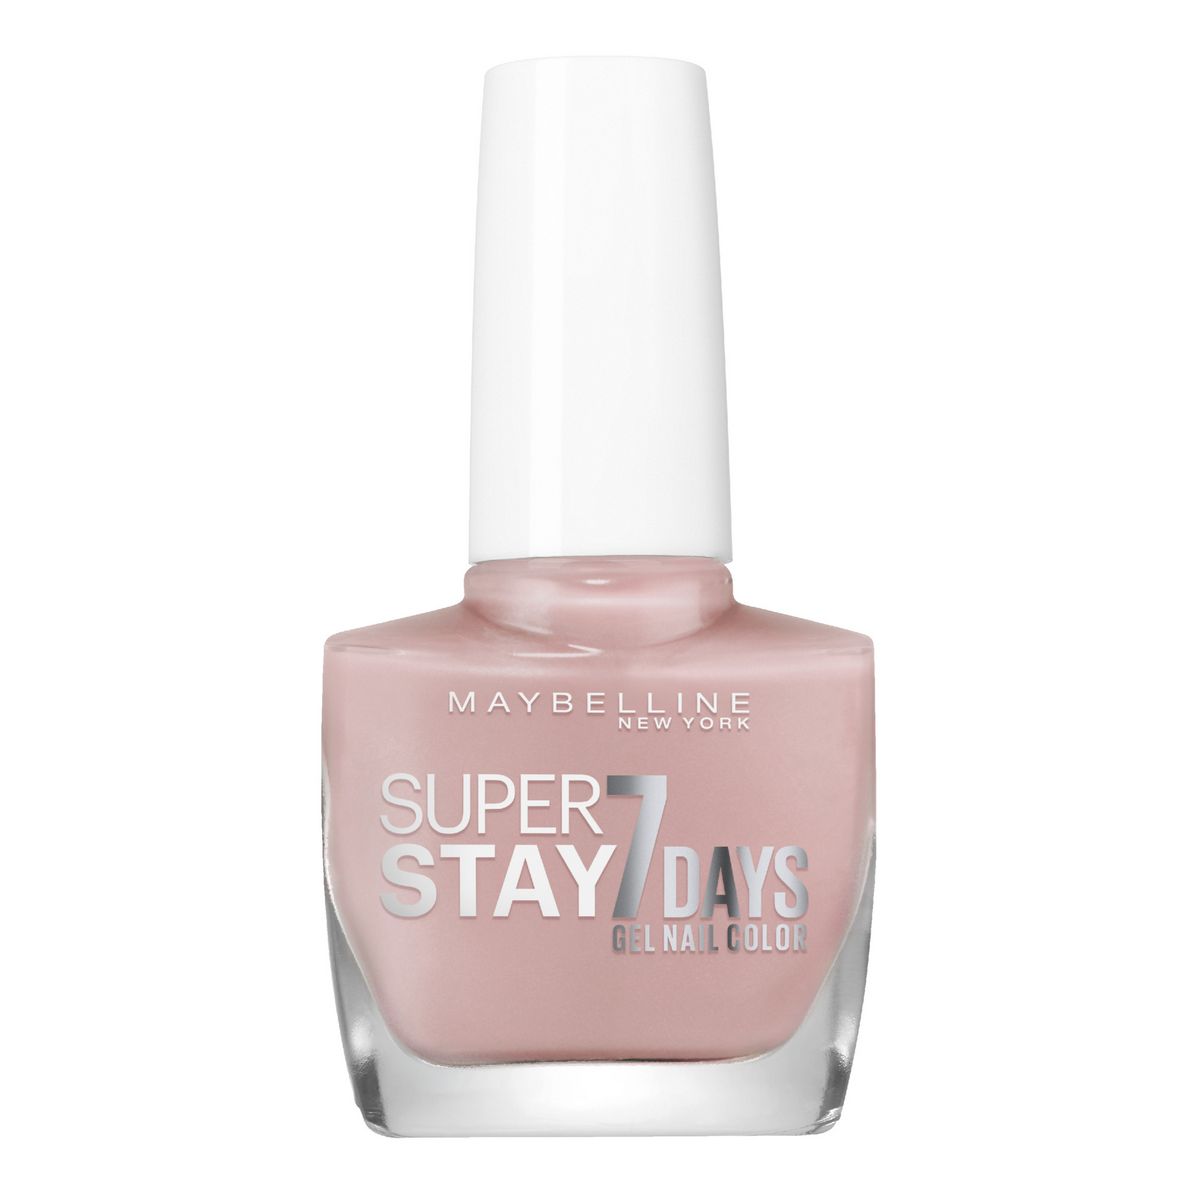 MAYBELLINE Tenue Strong Pro vernis à ongle gel rose poudre superstay 7 days 10ml